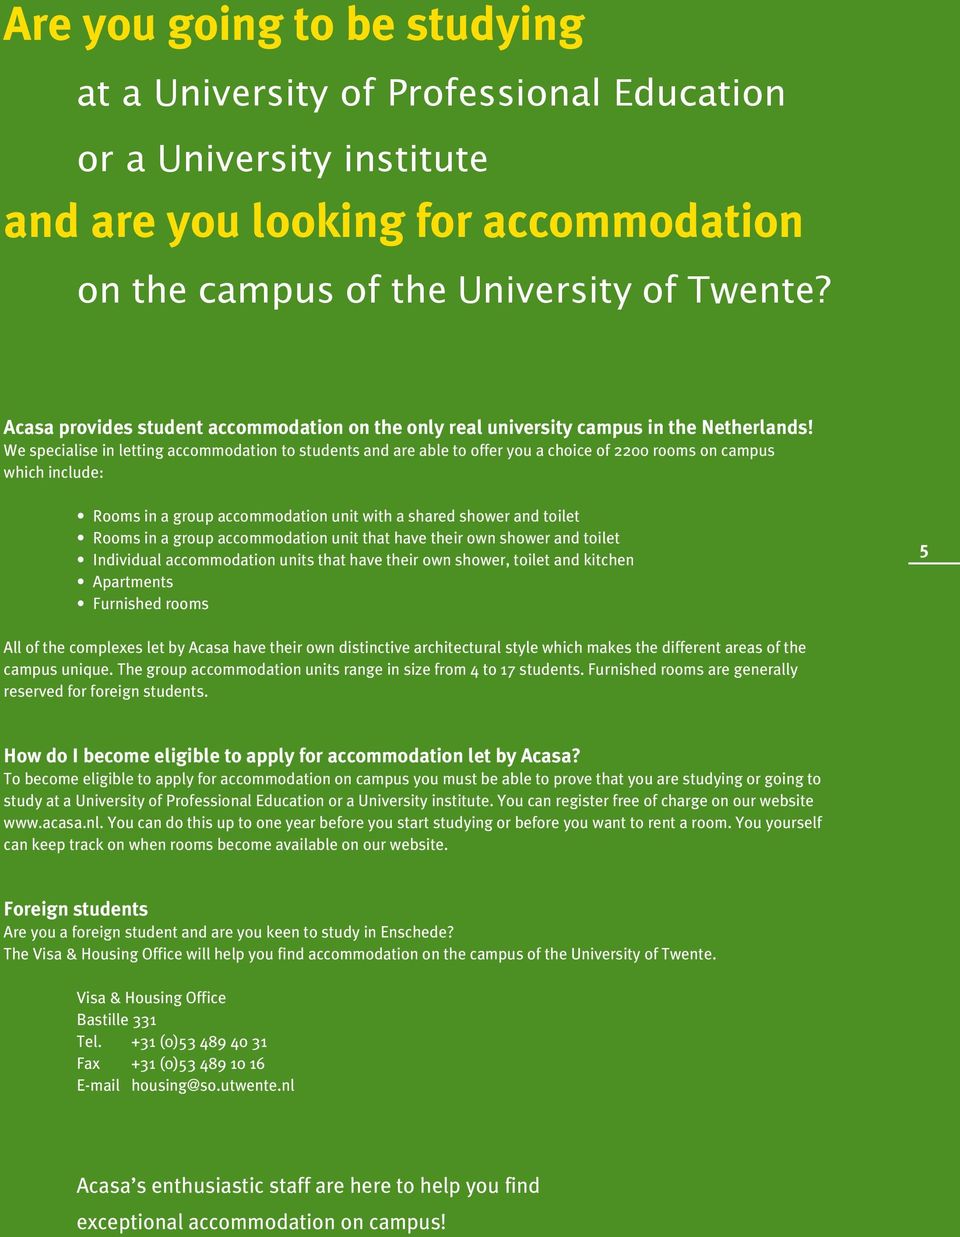 We specialise in letting accommodation to students and are able to offer you a choice of 2200 rooms on campus which include: Rooms in a group accommodation unit with a shared shower and toilet Rooms